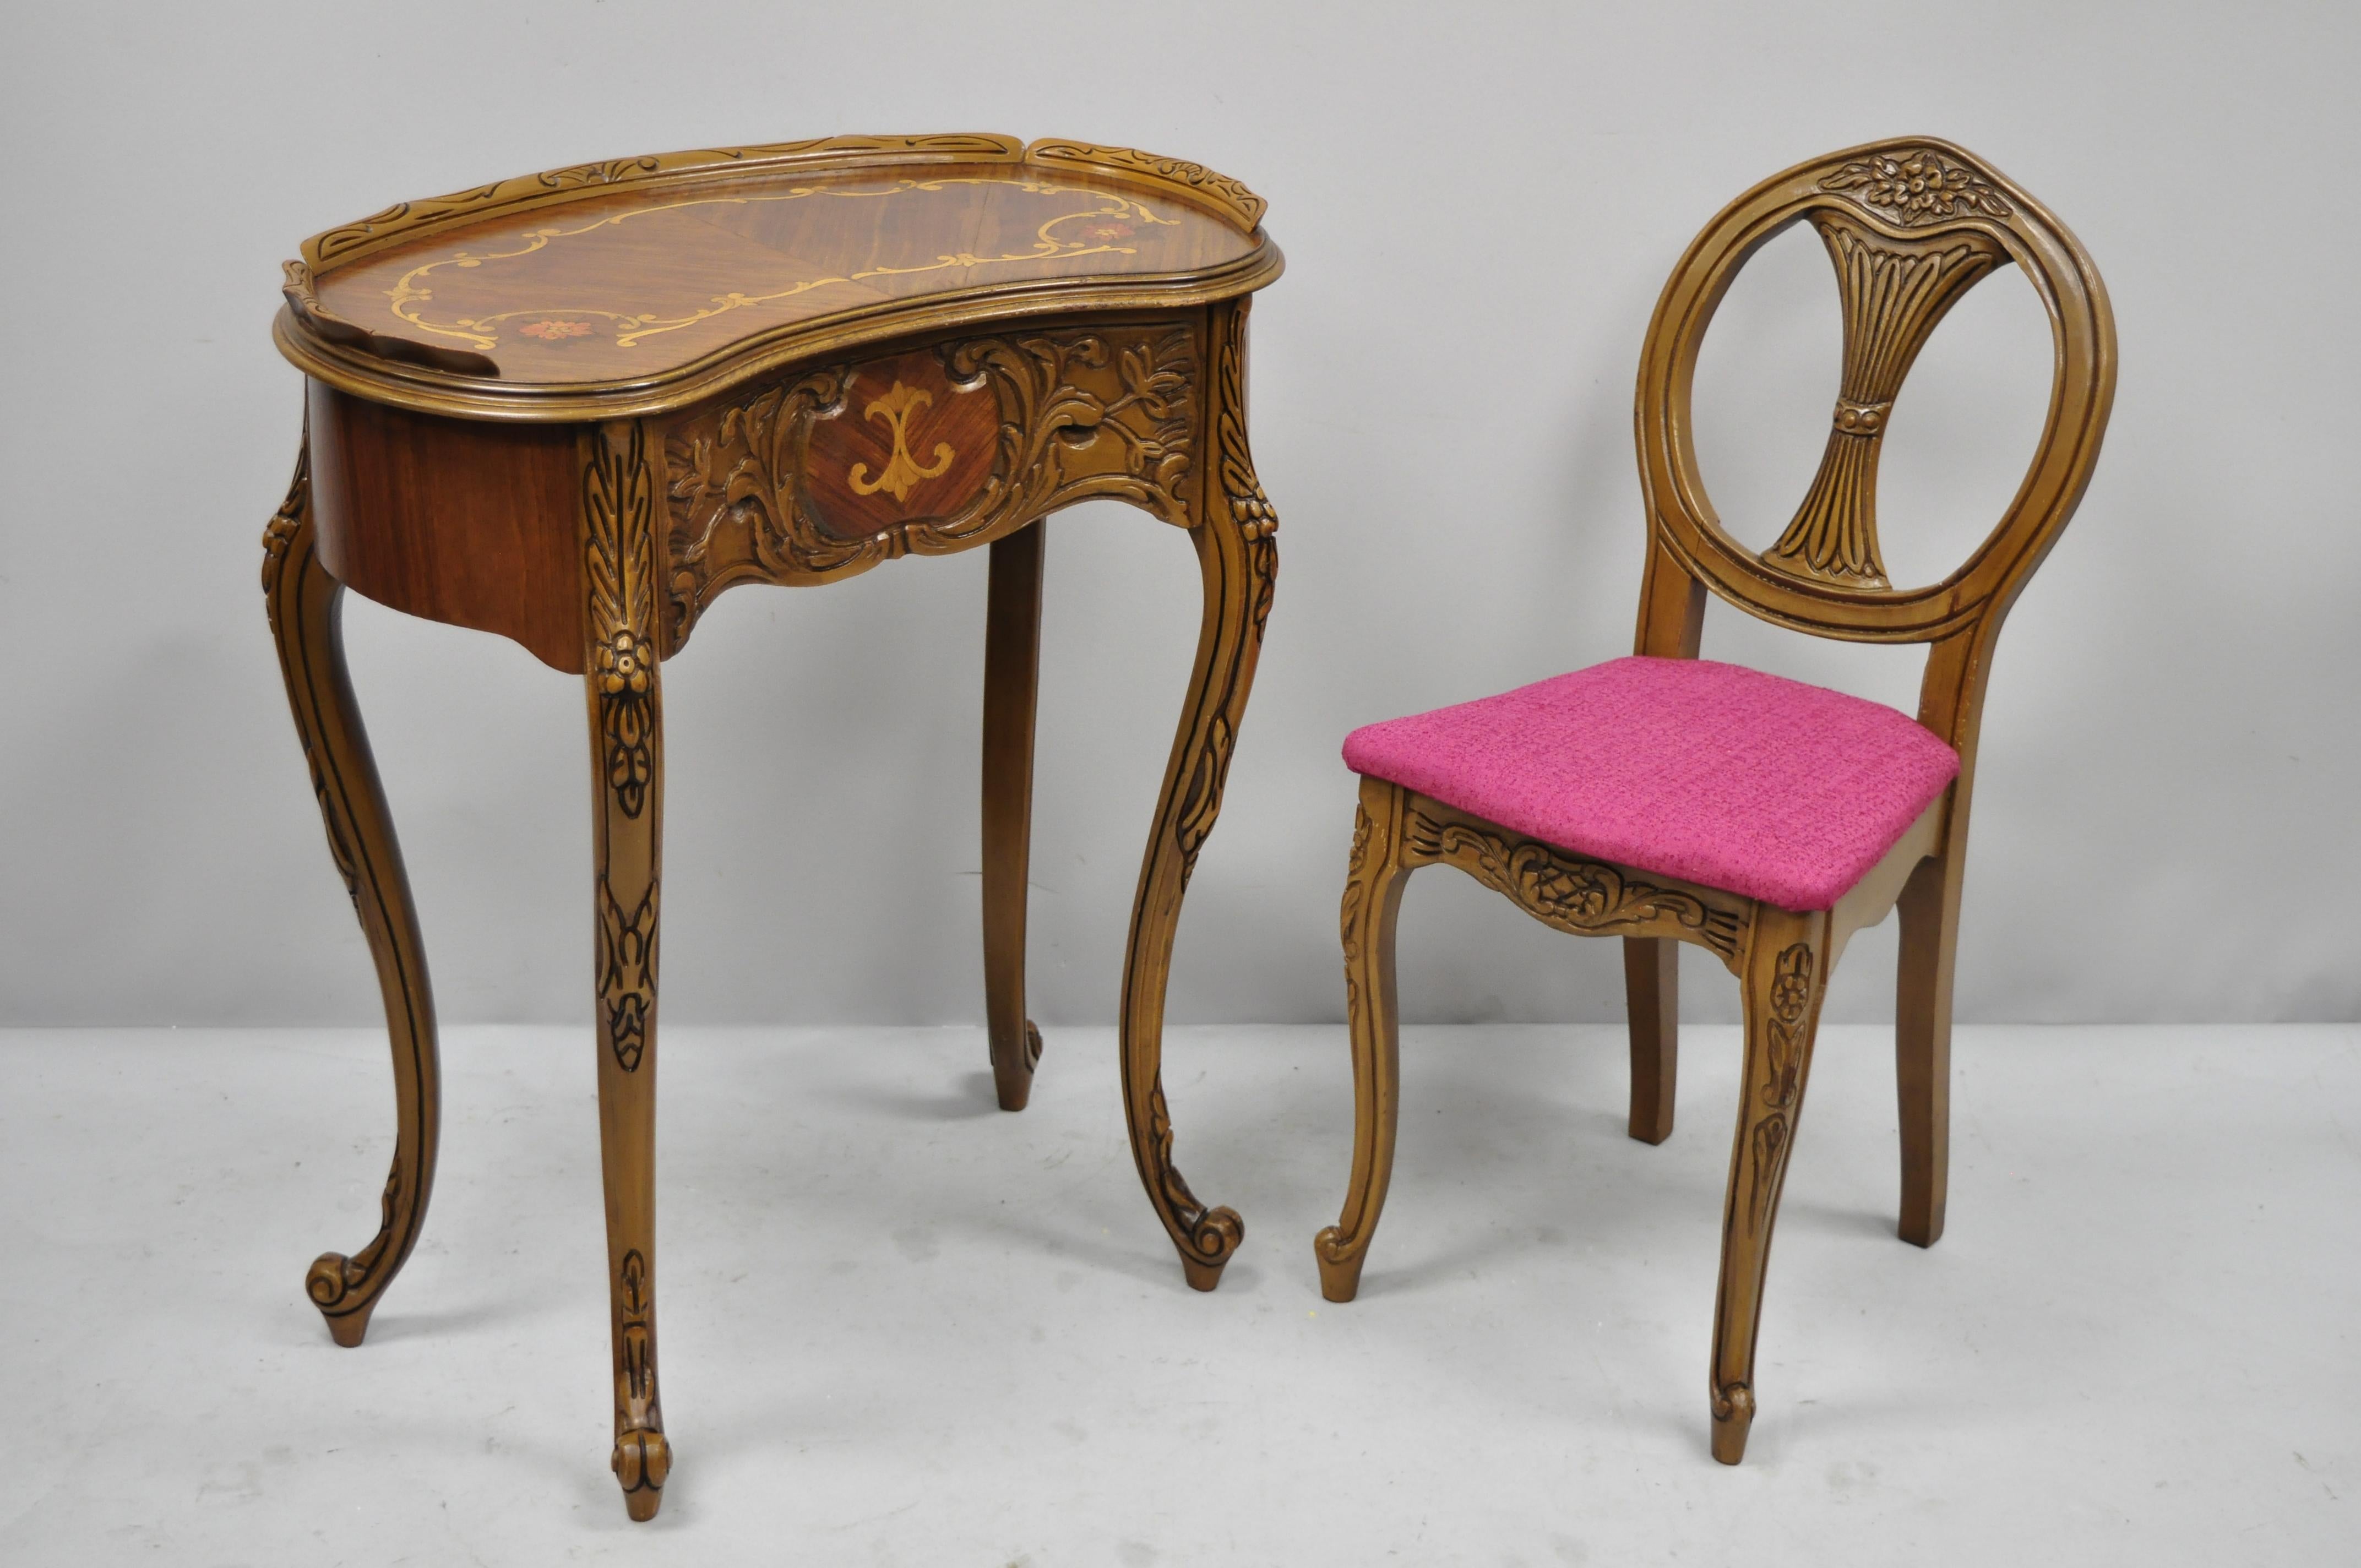 Small French Louis XV inlaid kidney bean petite desk vanity gossip table with chair. Item features petite kidney bean table, matching chair, finished back, 1 drawer, cabriole legs, nice inlay, great style and form, circa mid-20th century.